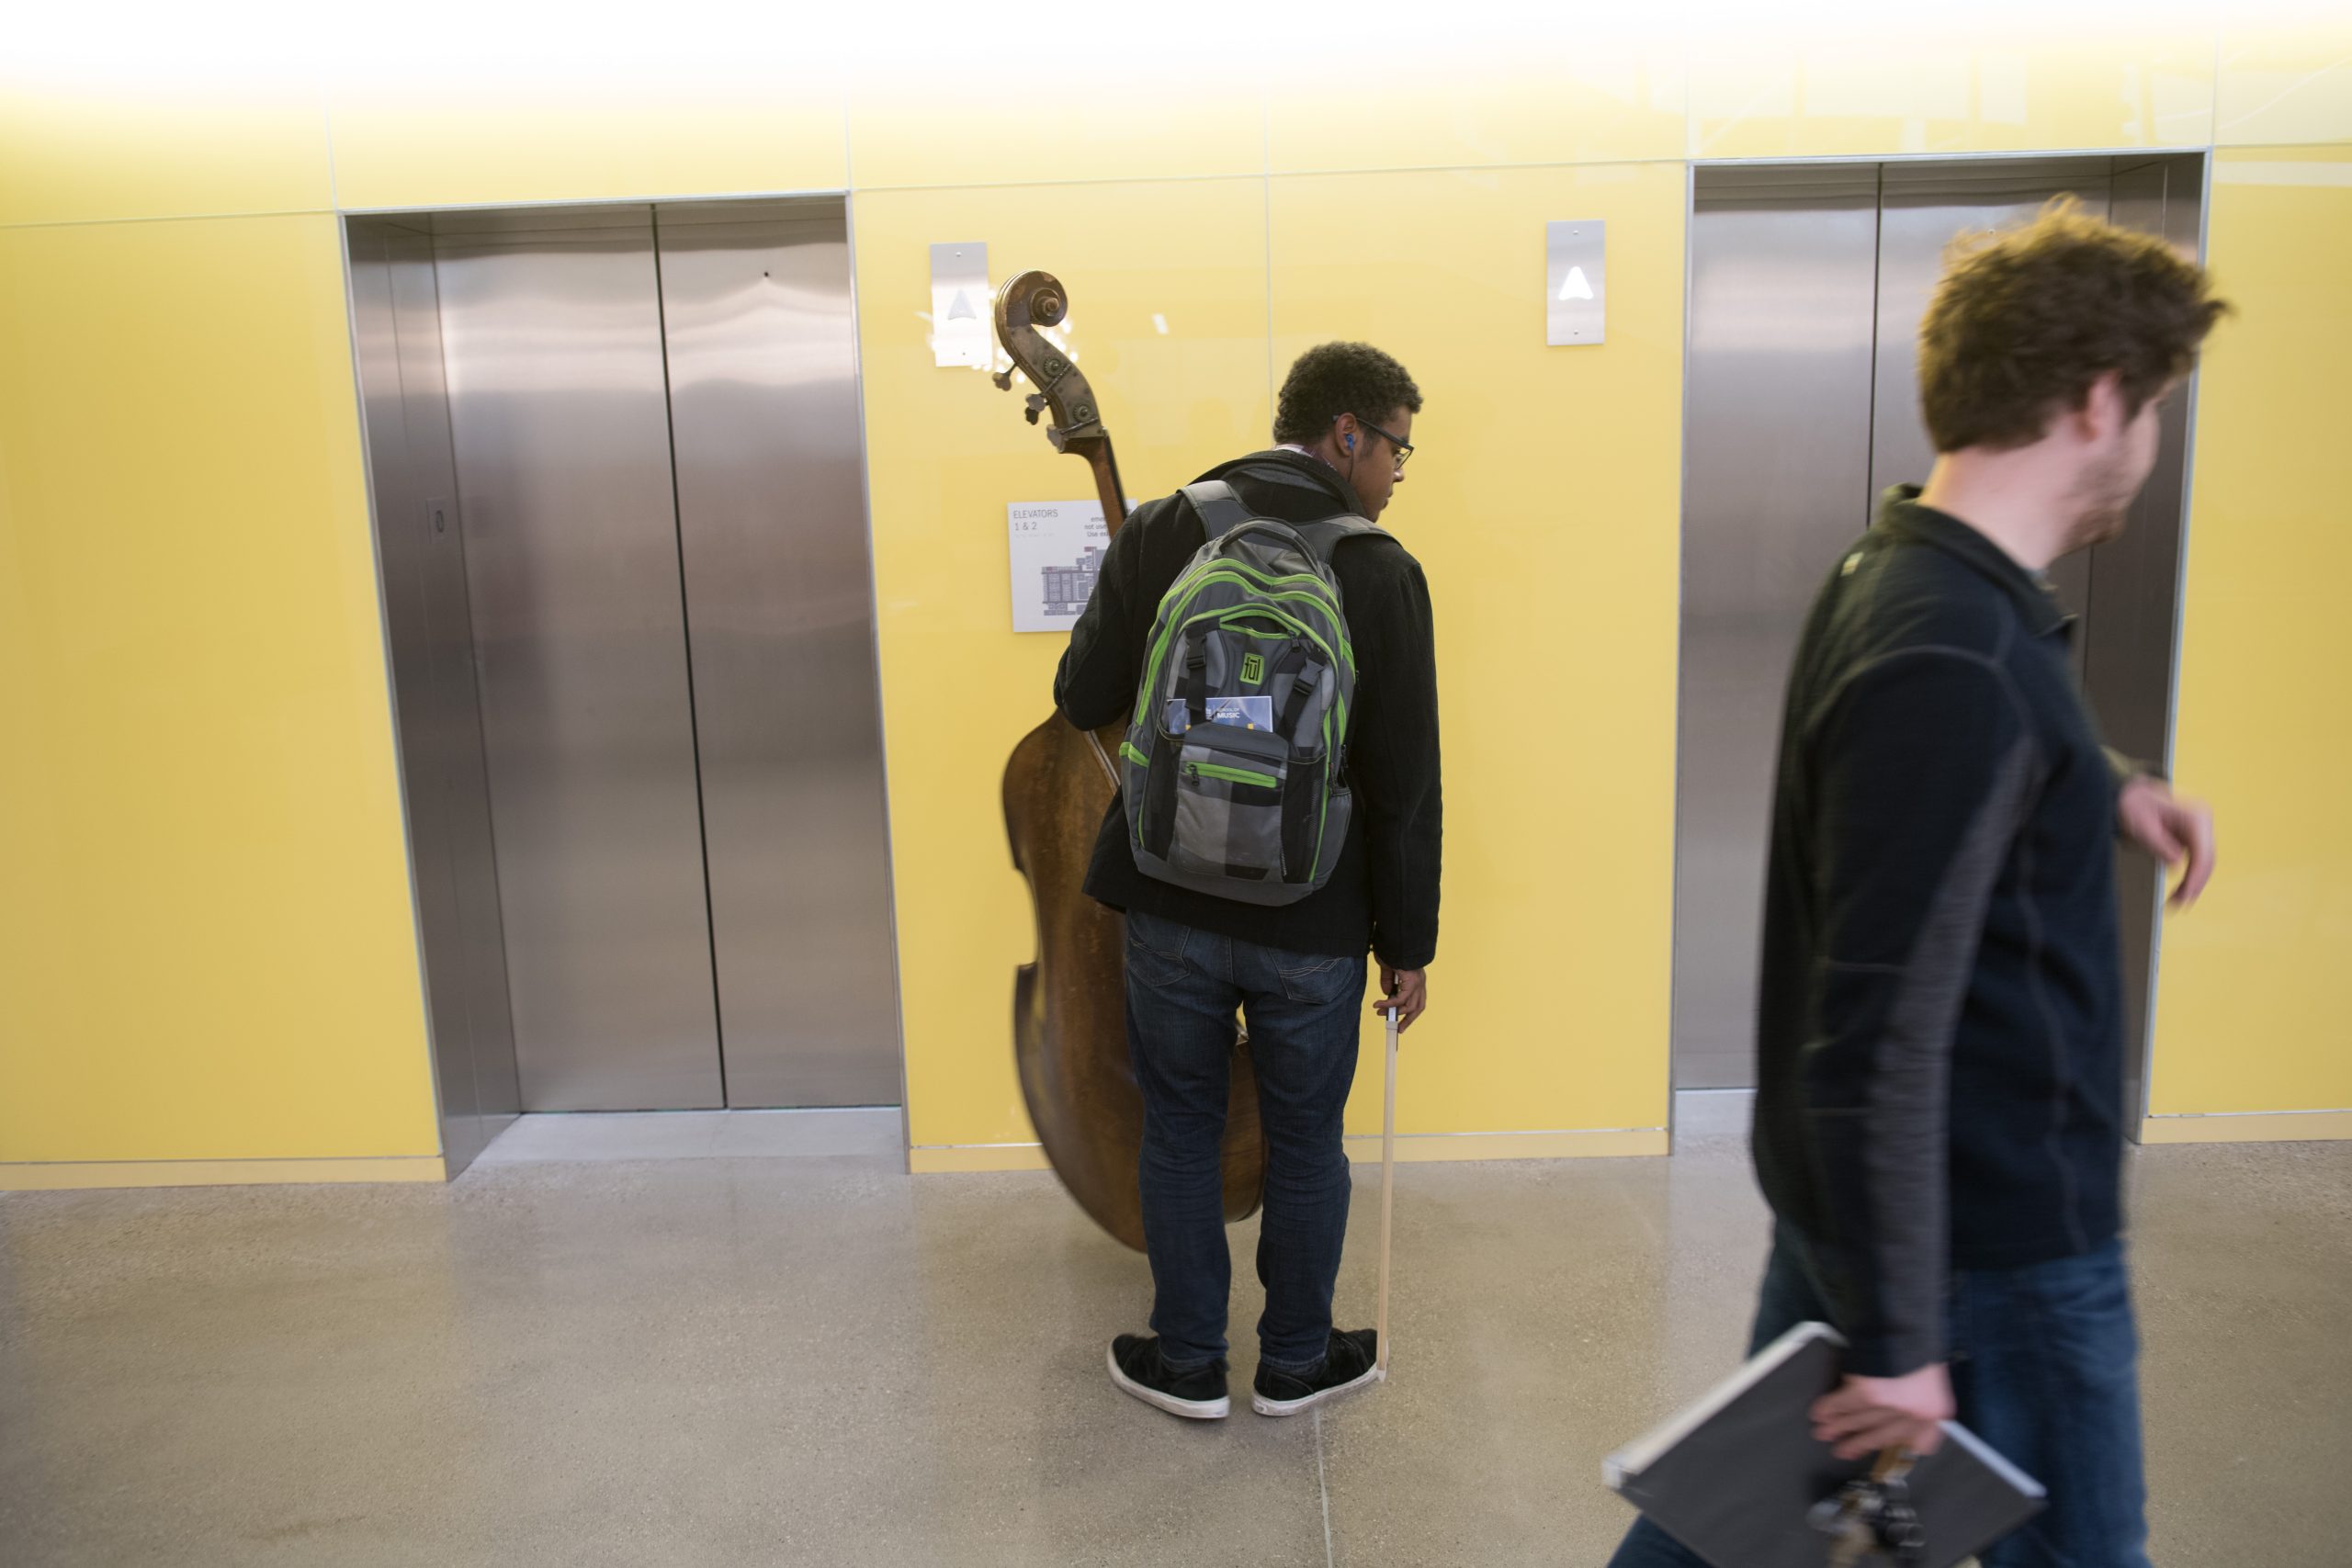 A student, holding a double bass musical instrument while waiting for an elevator. Another student, holding a book is walking past.